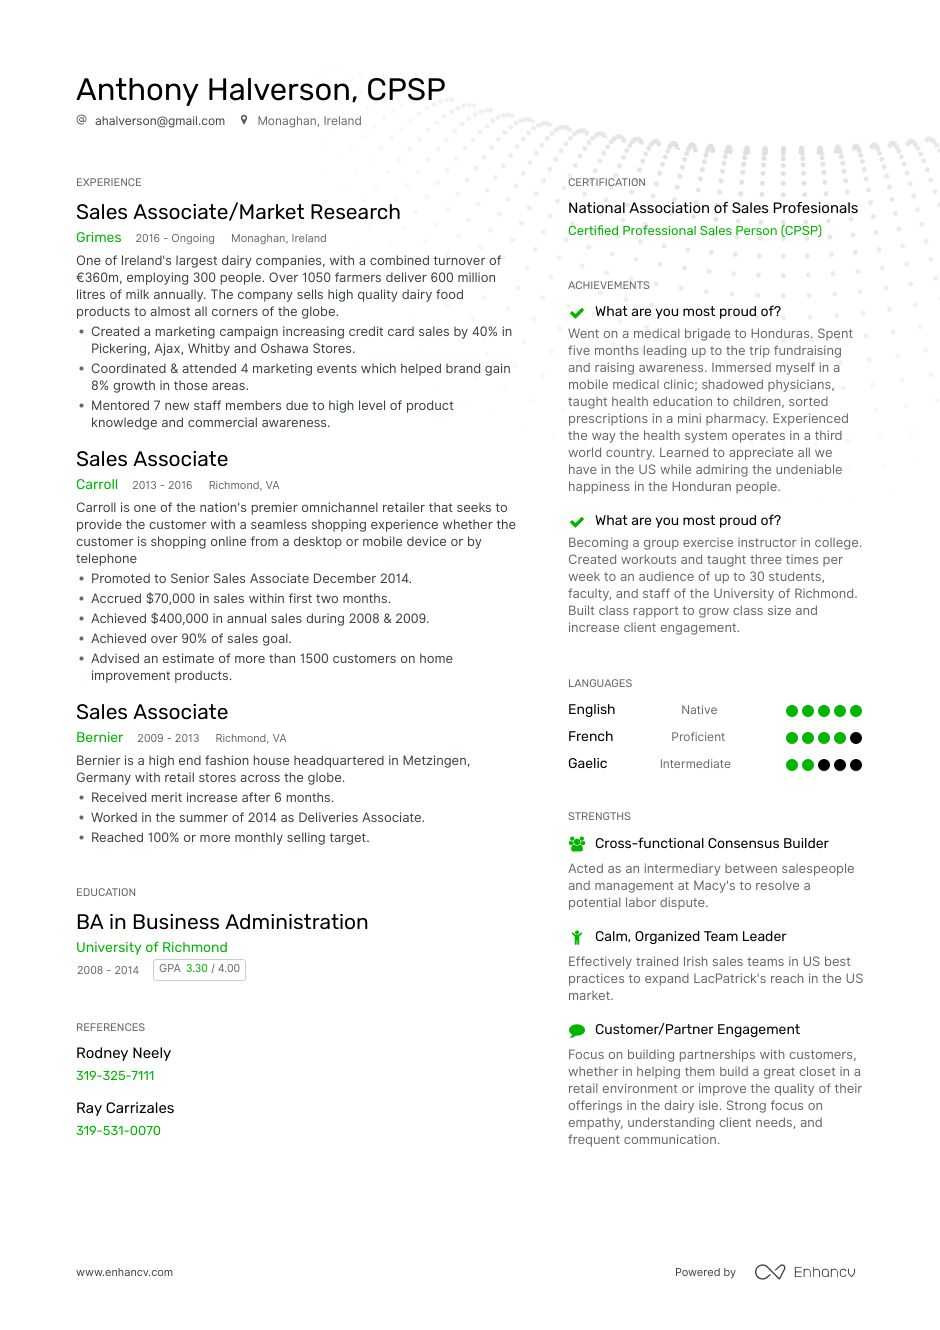 Sample Resume for Retail Sales Position Sales associate Resume Examples Guide & Pro Tips Enhancv